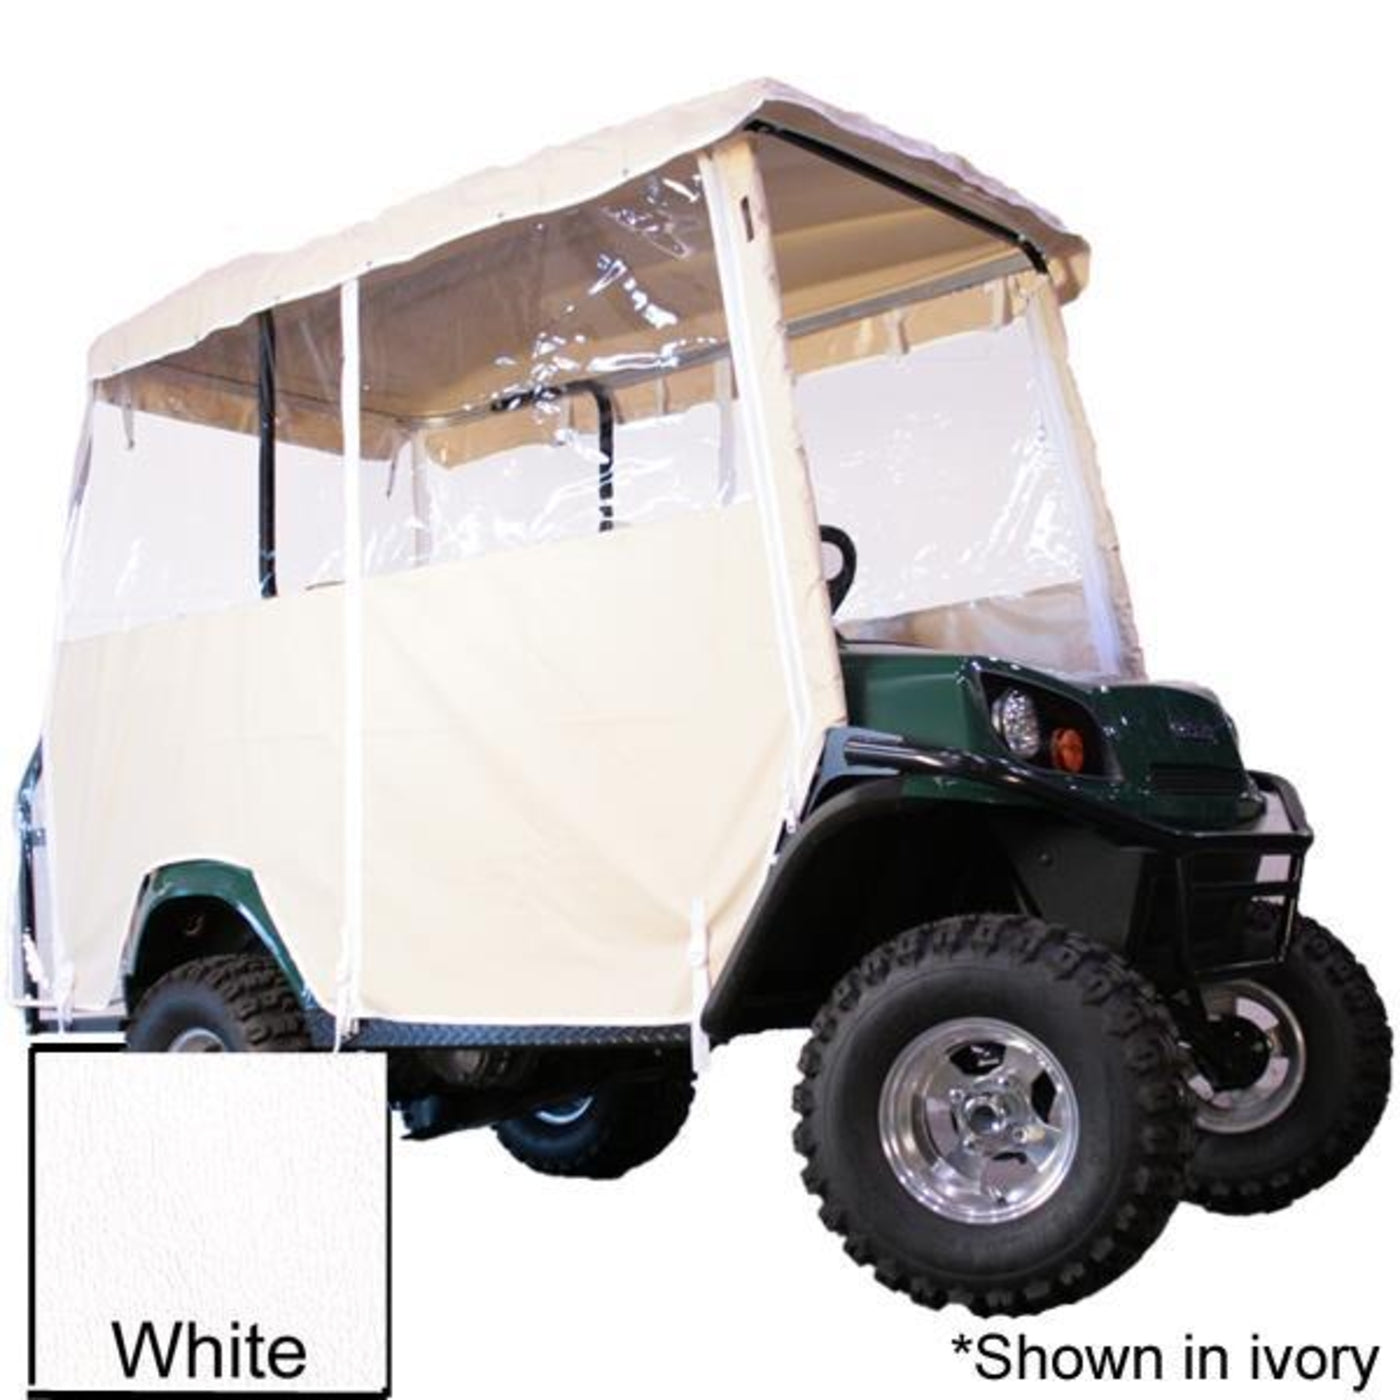 White 4-Passenger Over-The-Top Vinyl Enclosure For Club Car Villager w/Factory Fold-Down Seat